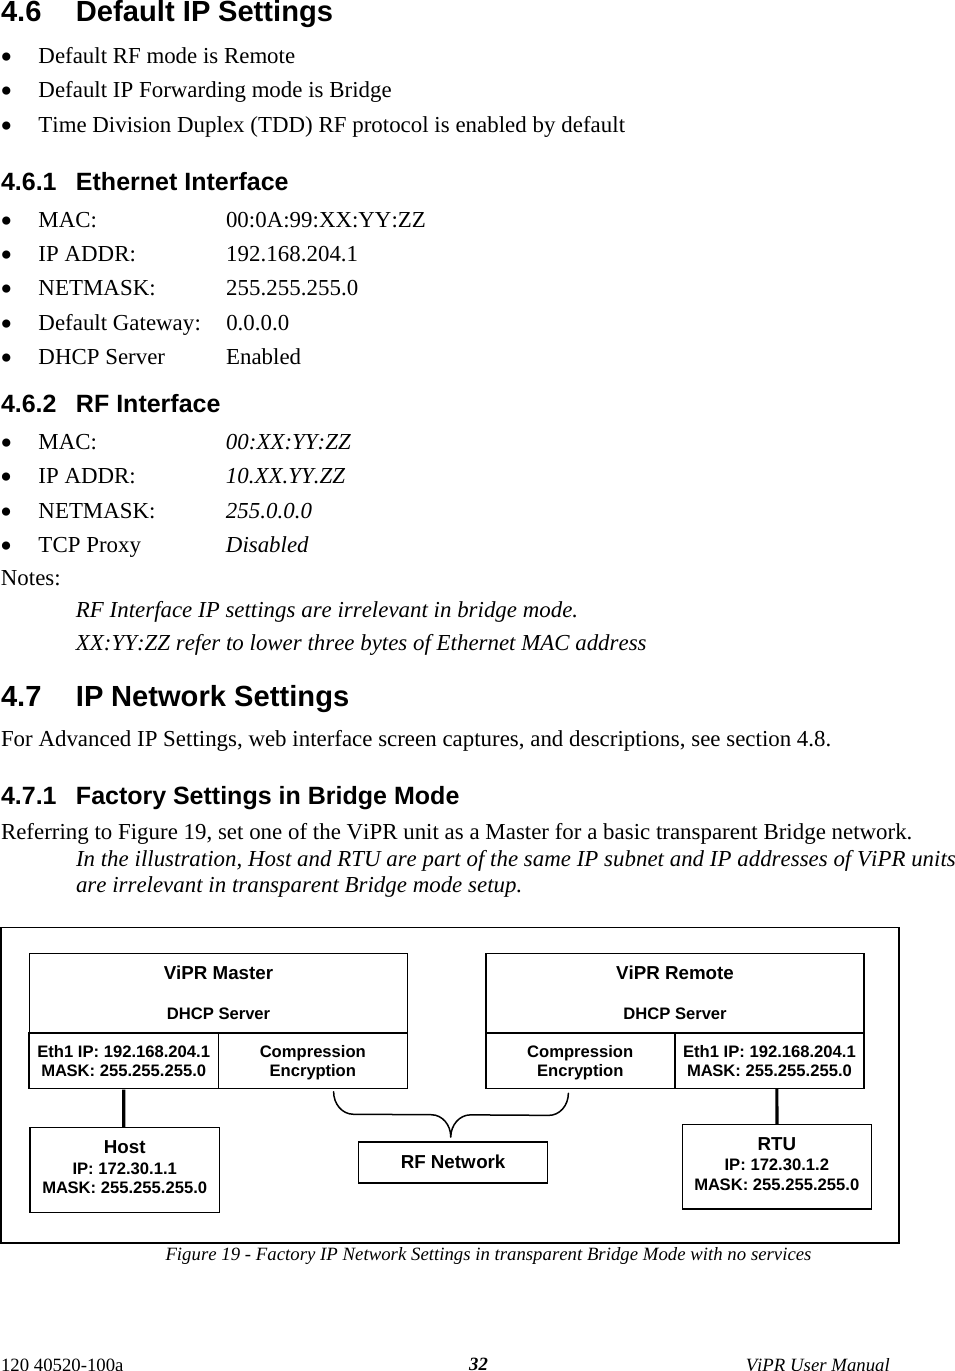  120 40520-100a    ViPR User Manual  324.6  Default IP Settings •  Default RF mode is Remote  •  Default IP Forwarding mode is Bridge •  Time Division Duplex (TDD) RF protocol is enabled by default 4.6.1 Ethernet Interface •  MAC:     00:0A:99:XX:YY:ZZ •  IP ADDR:    192.168.204.1 •  NETMASK:   255.255.255.0 •  Default Gateway:   0.0.0.0 •  DHCP Server  Enabled 4.6.2 RF Interface •  MAC:     00:XX:YY:ZZ •  IP ADDR:    10.XX.YY.ZZ •  NETMASK:   255.0.0.0 •  TCP Proxy    Disabled Notes: RF Interface IP settings are irrelevant in bridge mode. XX:YY:ZZ refer to lower three bytes of Ethernet MAC address 4.7  IP Network Settings For Advanced IP Settings, web interface screen captures, and descriptions, see section 4.8. 4.7.1  Factory Settings in Bridge Mode Referring to Figure 19, set one of the ViPR unit as a Master for a basic transparent Bridge network. In the illustration, Host and RTU are part of the same IP subnet and IP addresses of ViPR units are irrelevant in transparent Bridge mode setup. Figure 19 - Factory IP Network Settings in transparent Bridge Mode with no services  ViPR Master  DHCP Server Eth1 IP: 192.168.204.1 MASK: 255.255.255.0  Compression Encryption ViPR Remote  DHCP Server Compression Encryption Eth1 IP: 192.168.204.1 MASK: 255.255.255.0 RF Network Host IP: 172.30.1.1 MASK: 255.255.255.0 RTU IP: 172.30.1.2 MASK: 255.255.255.0 